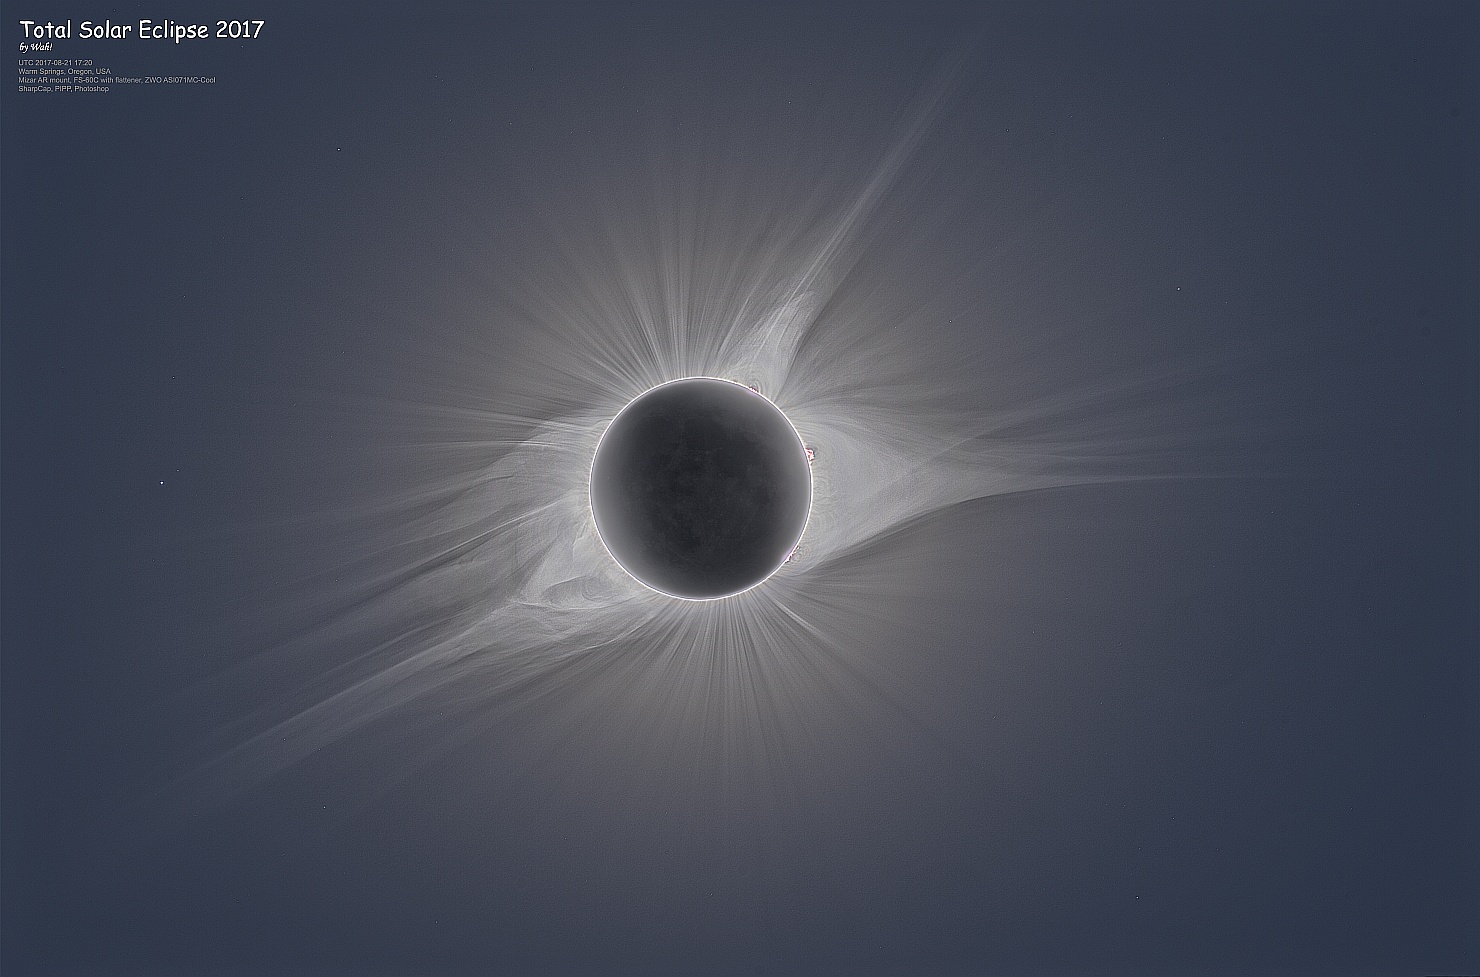 TotalSolarEclipse_ASI071MC-Cool_20170821_Stacked2.jpg